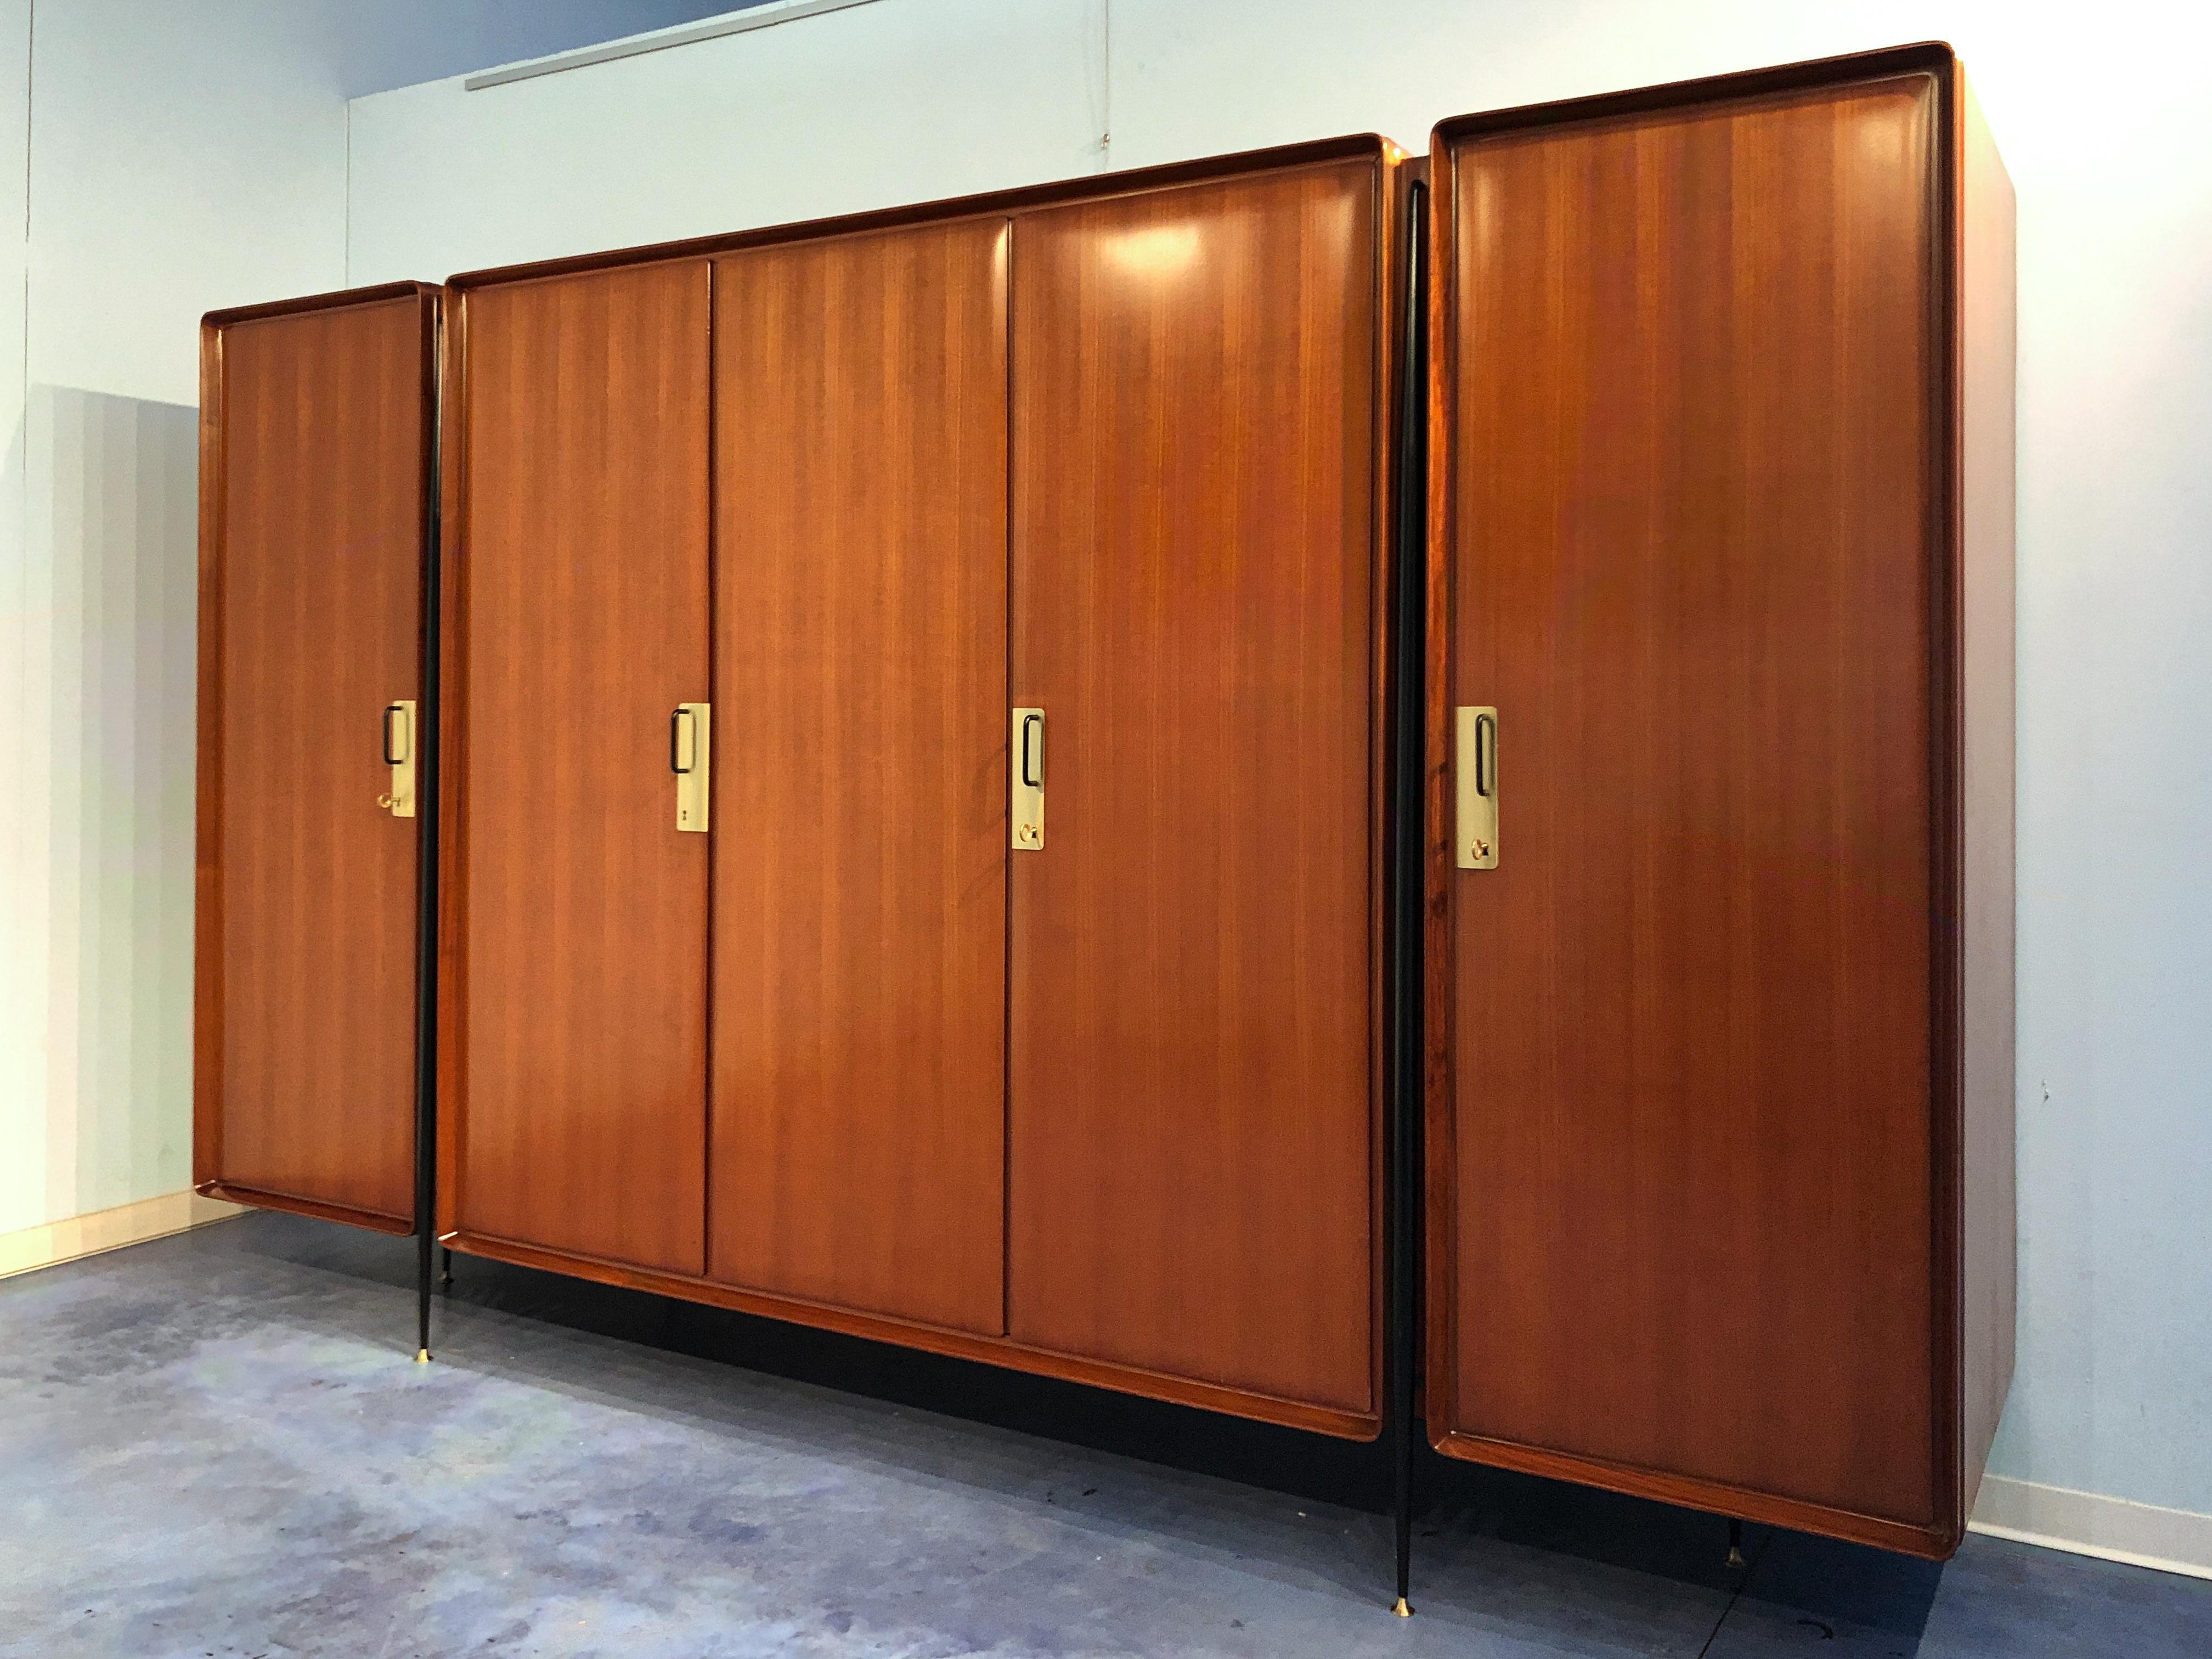 Stylish Italian wardrobe designed by Silvio Cavatorta in the 1950s.
The cabinet is made of semi-gloss lacquered teak veneer with five doors finished with brass details, supported on tapered steel legs with brass feet.
Internally it offers a lot of